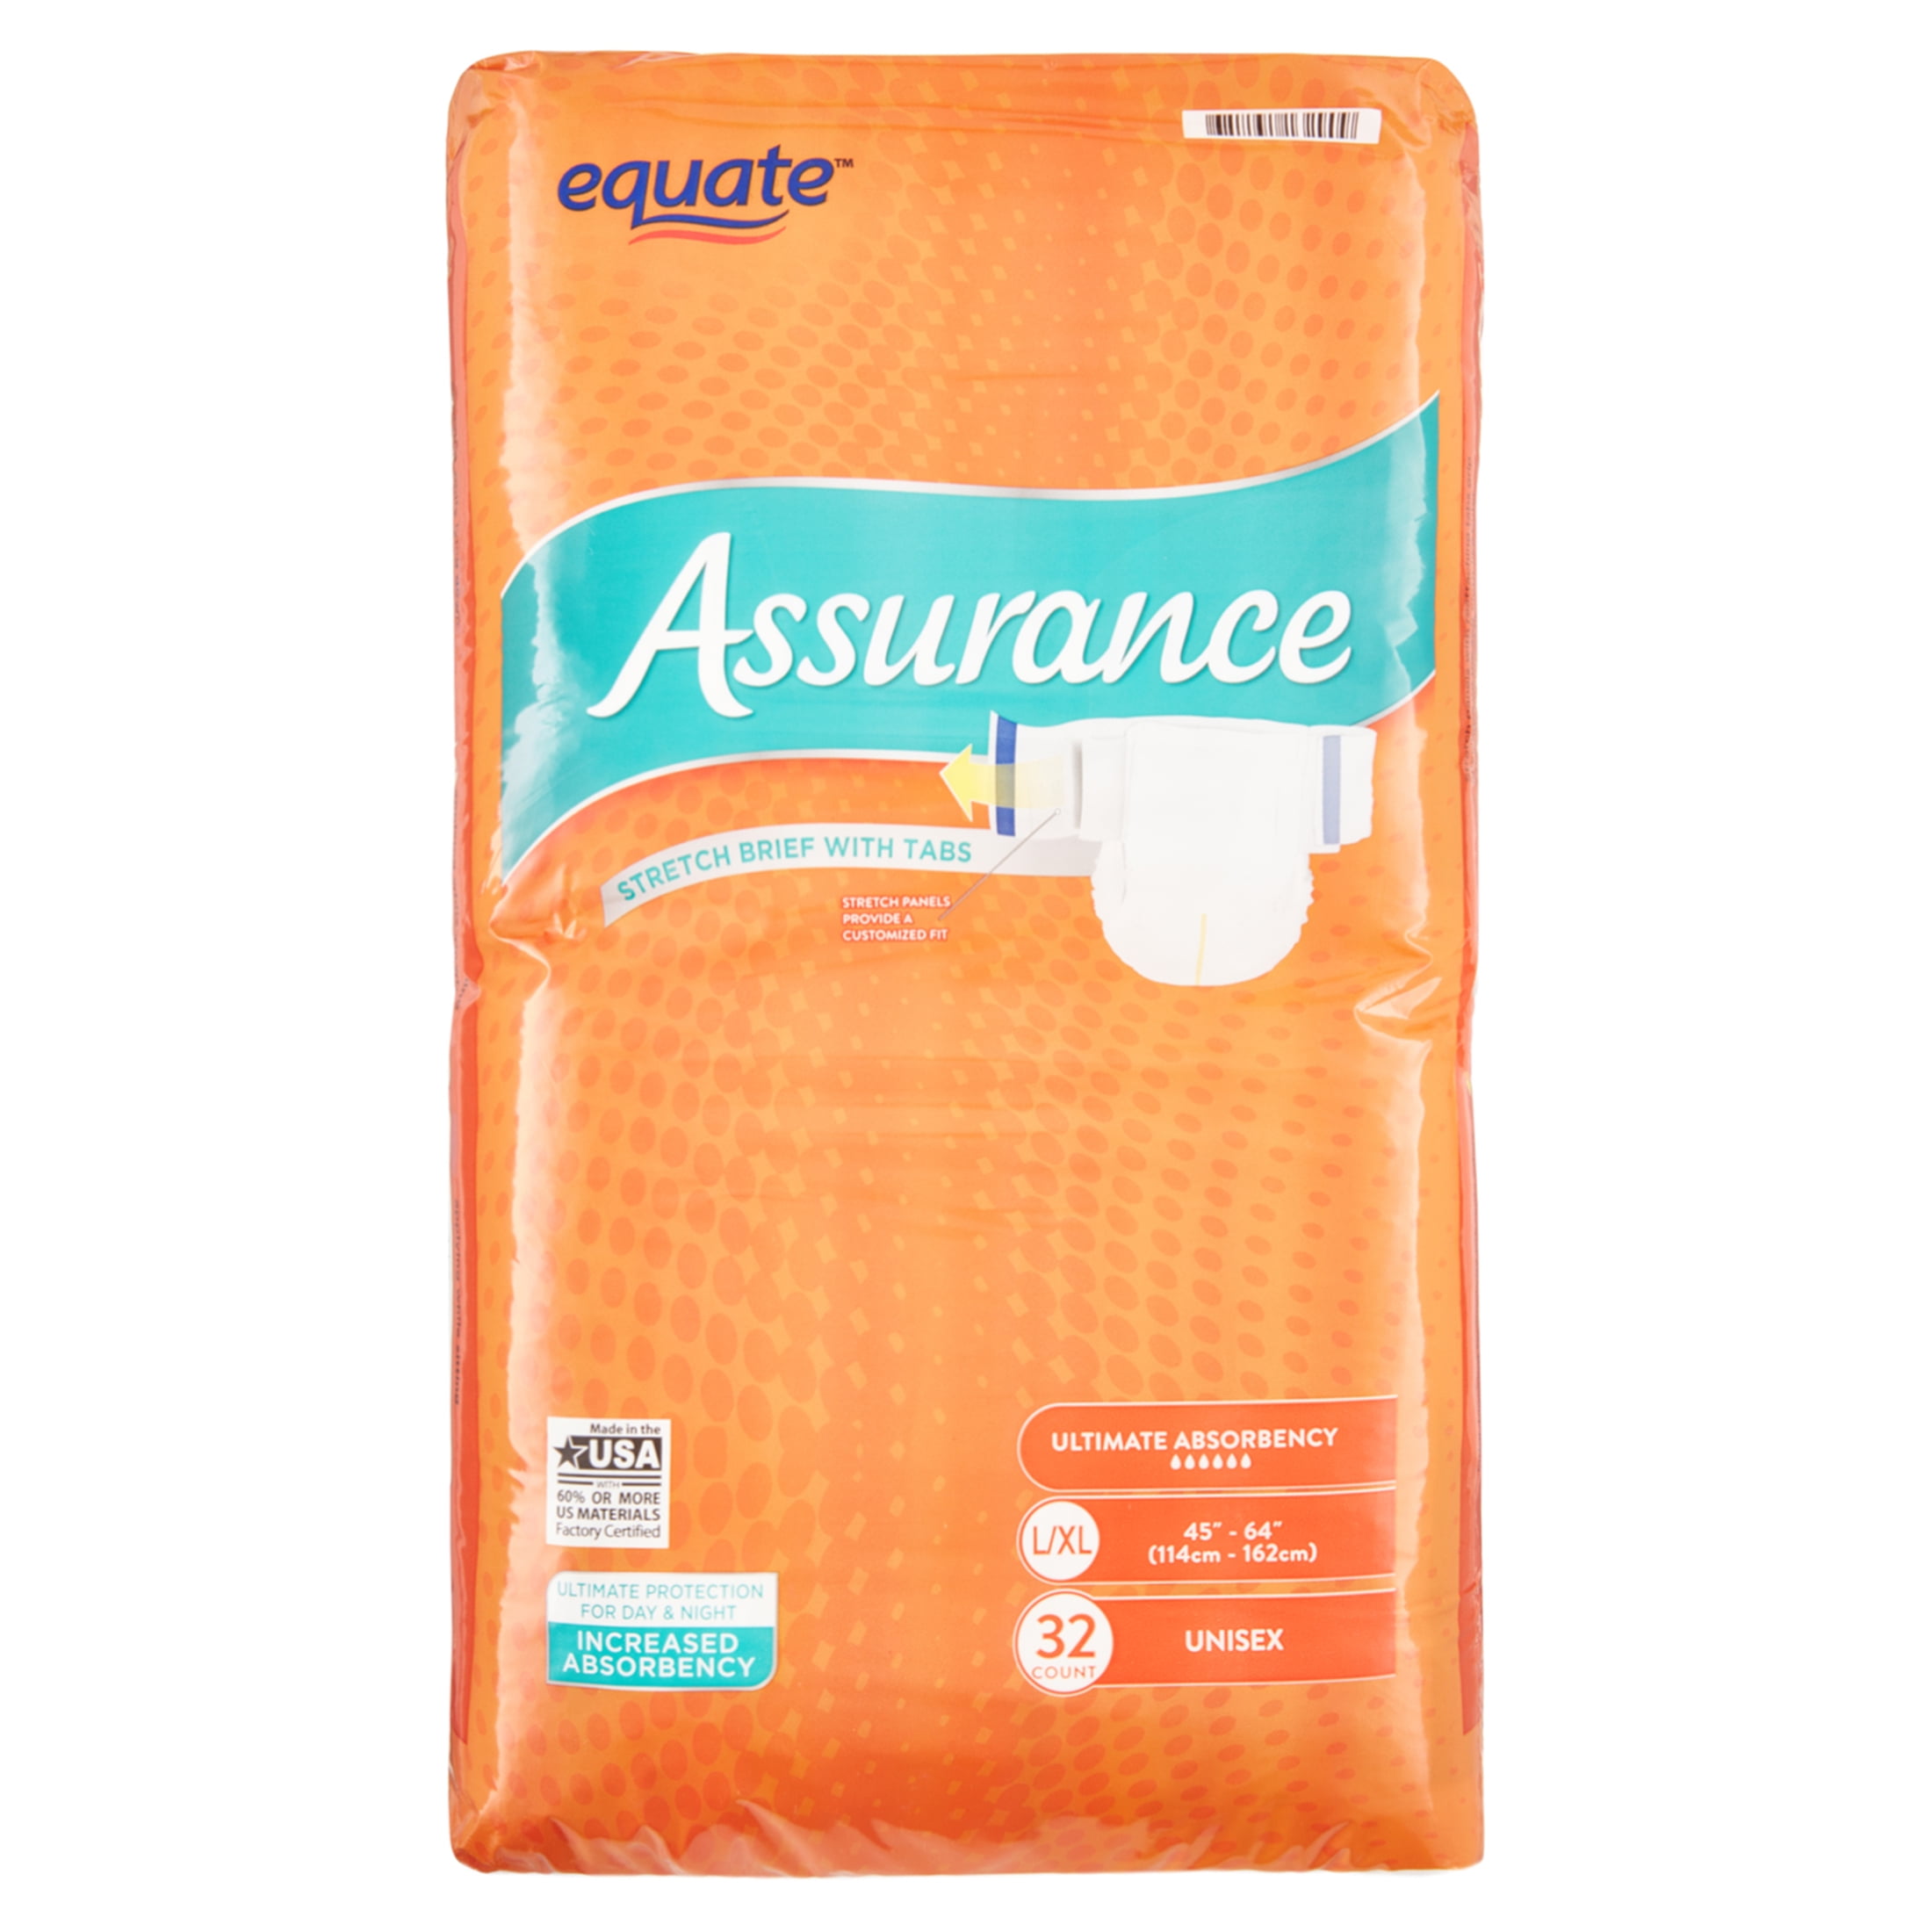 Assurance Unisex Incontinence Briefs, Ultimate Italy